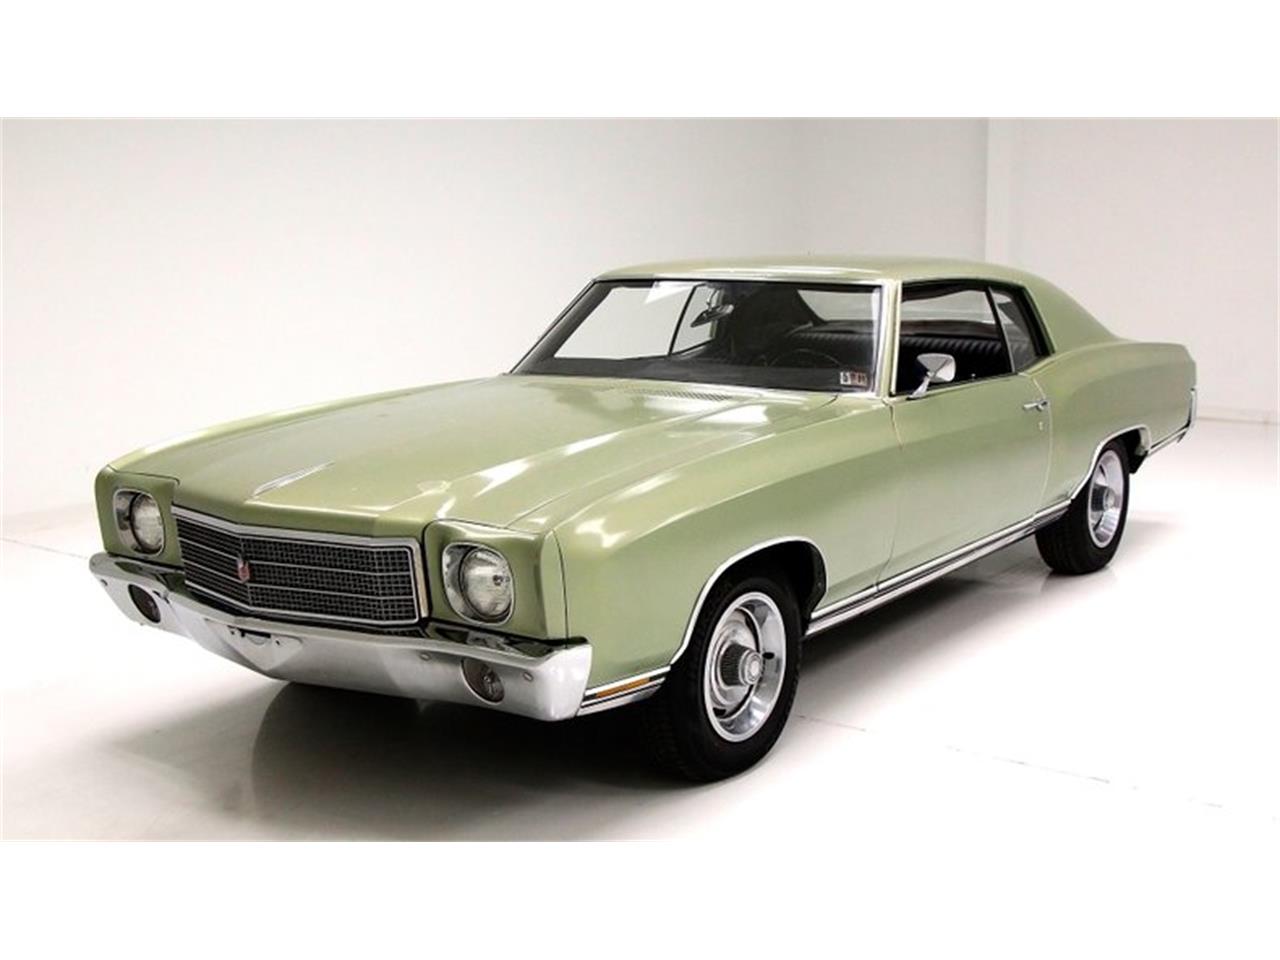 Green Mist 1970 Chevrolet Monte Carlo for sale located in Morgantown, Penns...